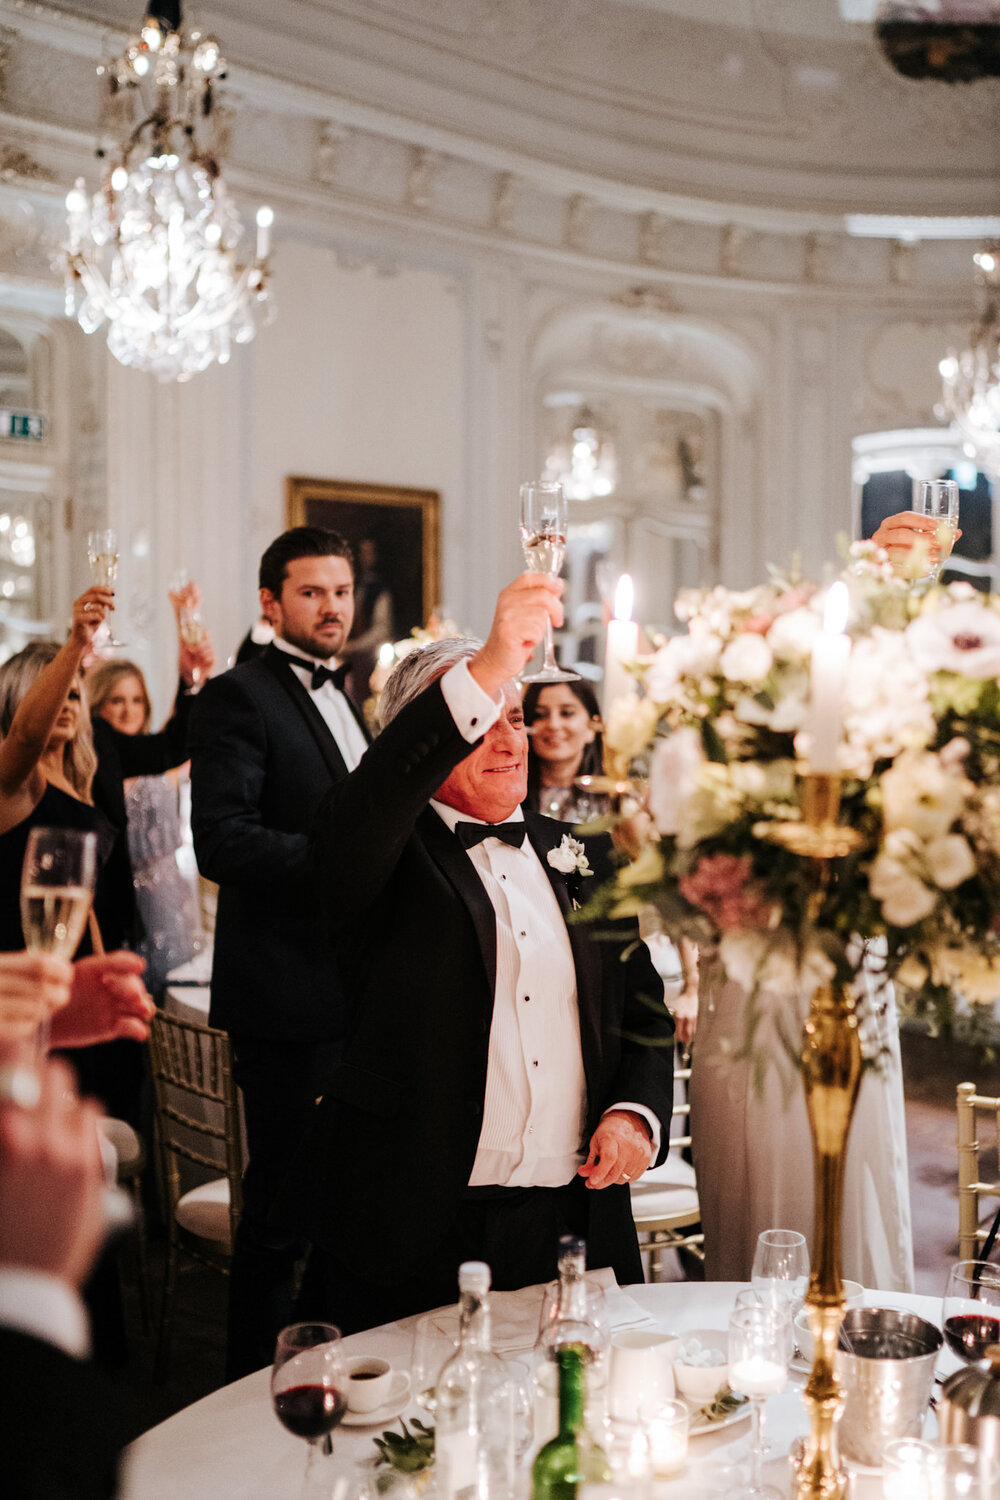 Father of the groom raises his glass as everyone around him toasts the newly married couple